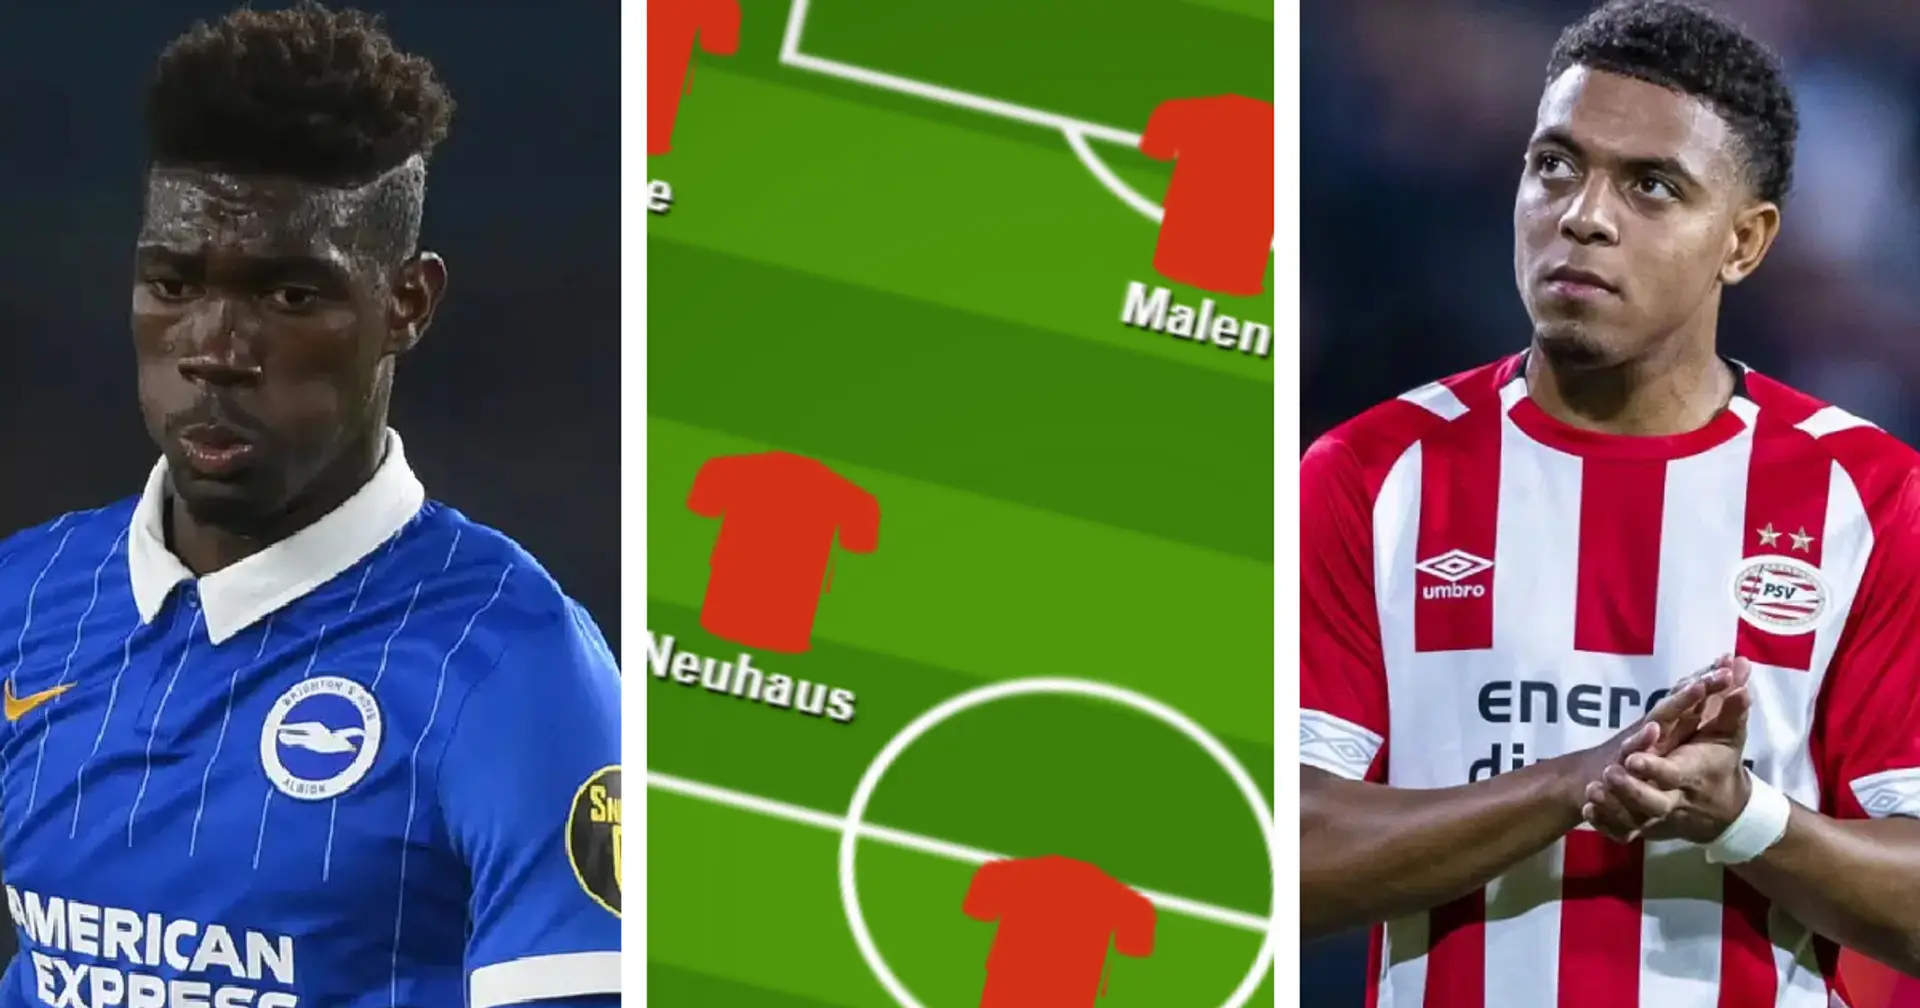 What Liverpool could look like with Bissouma or Malen in - 3 potential line-ups